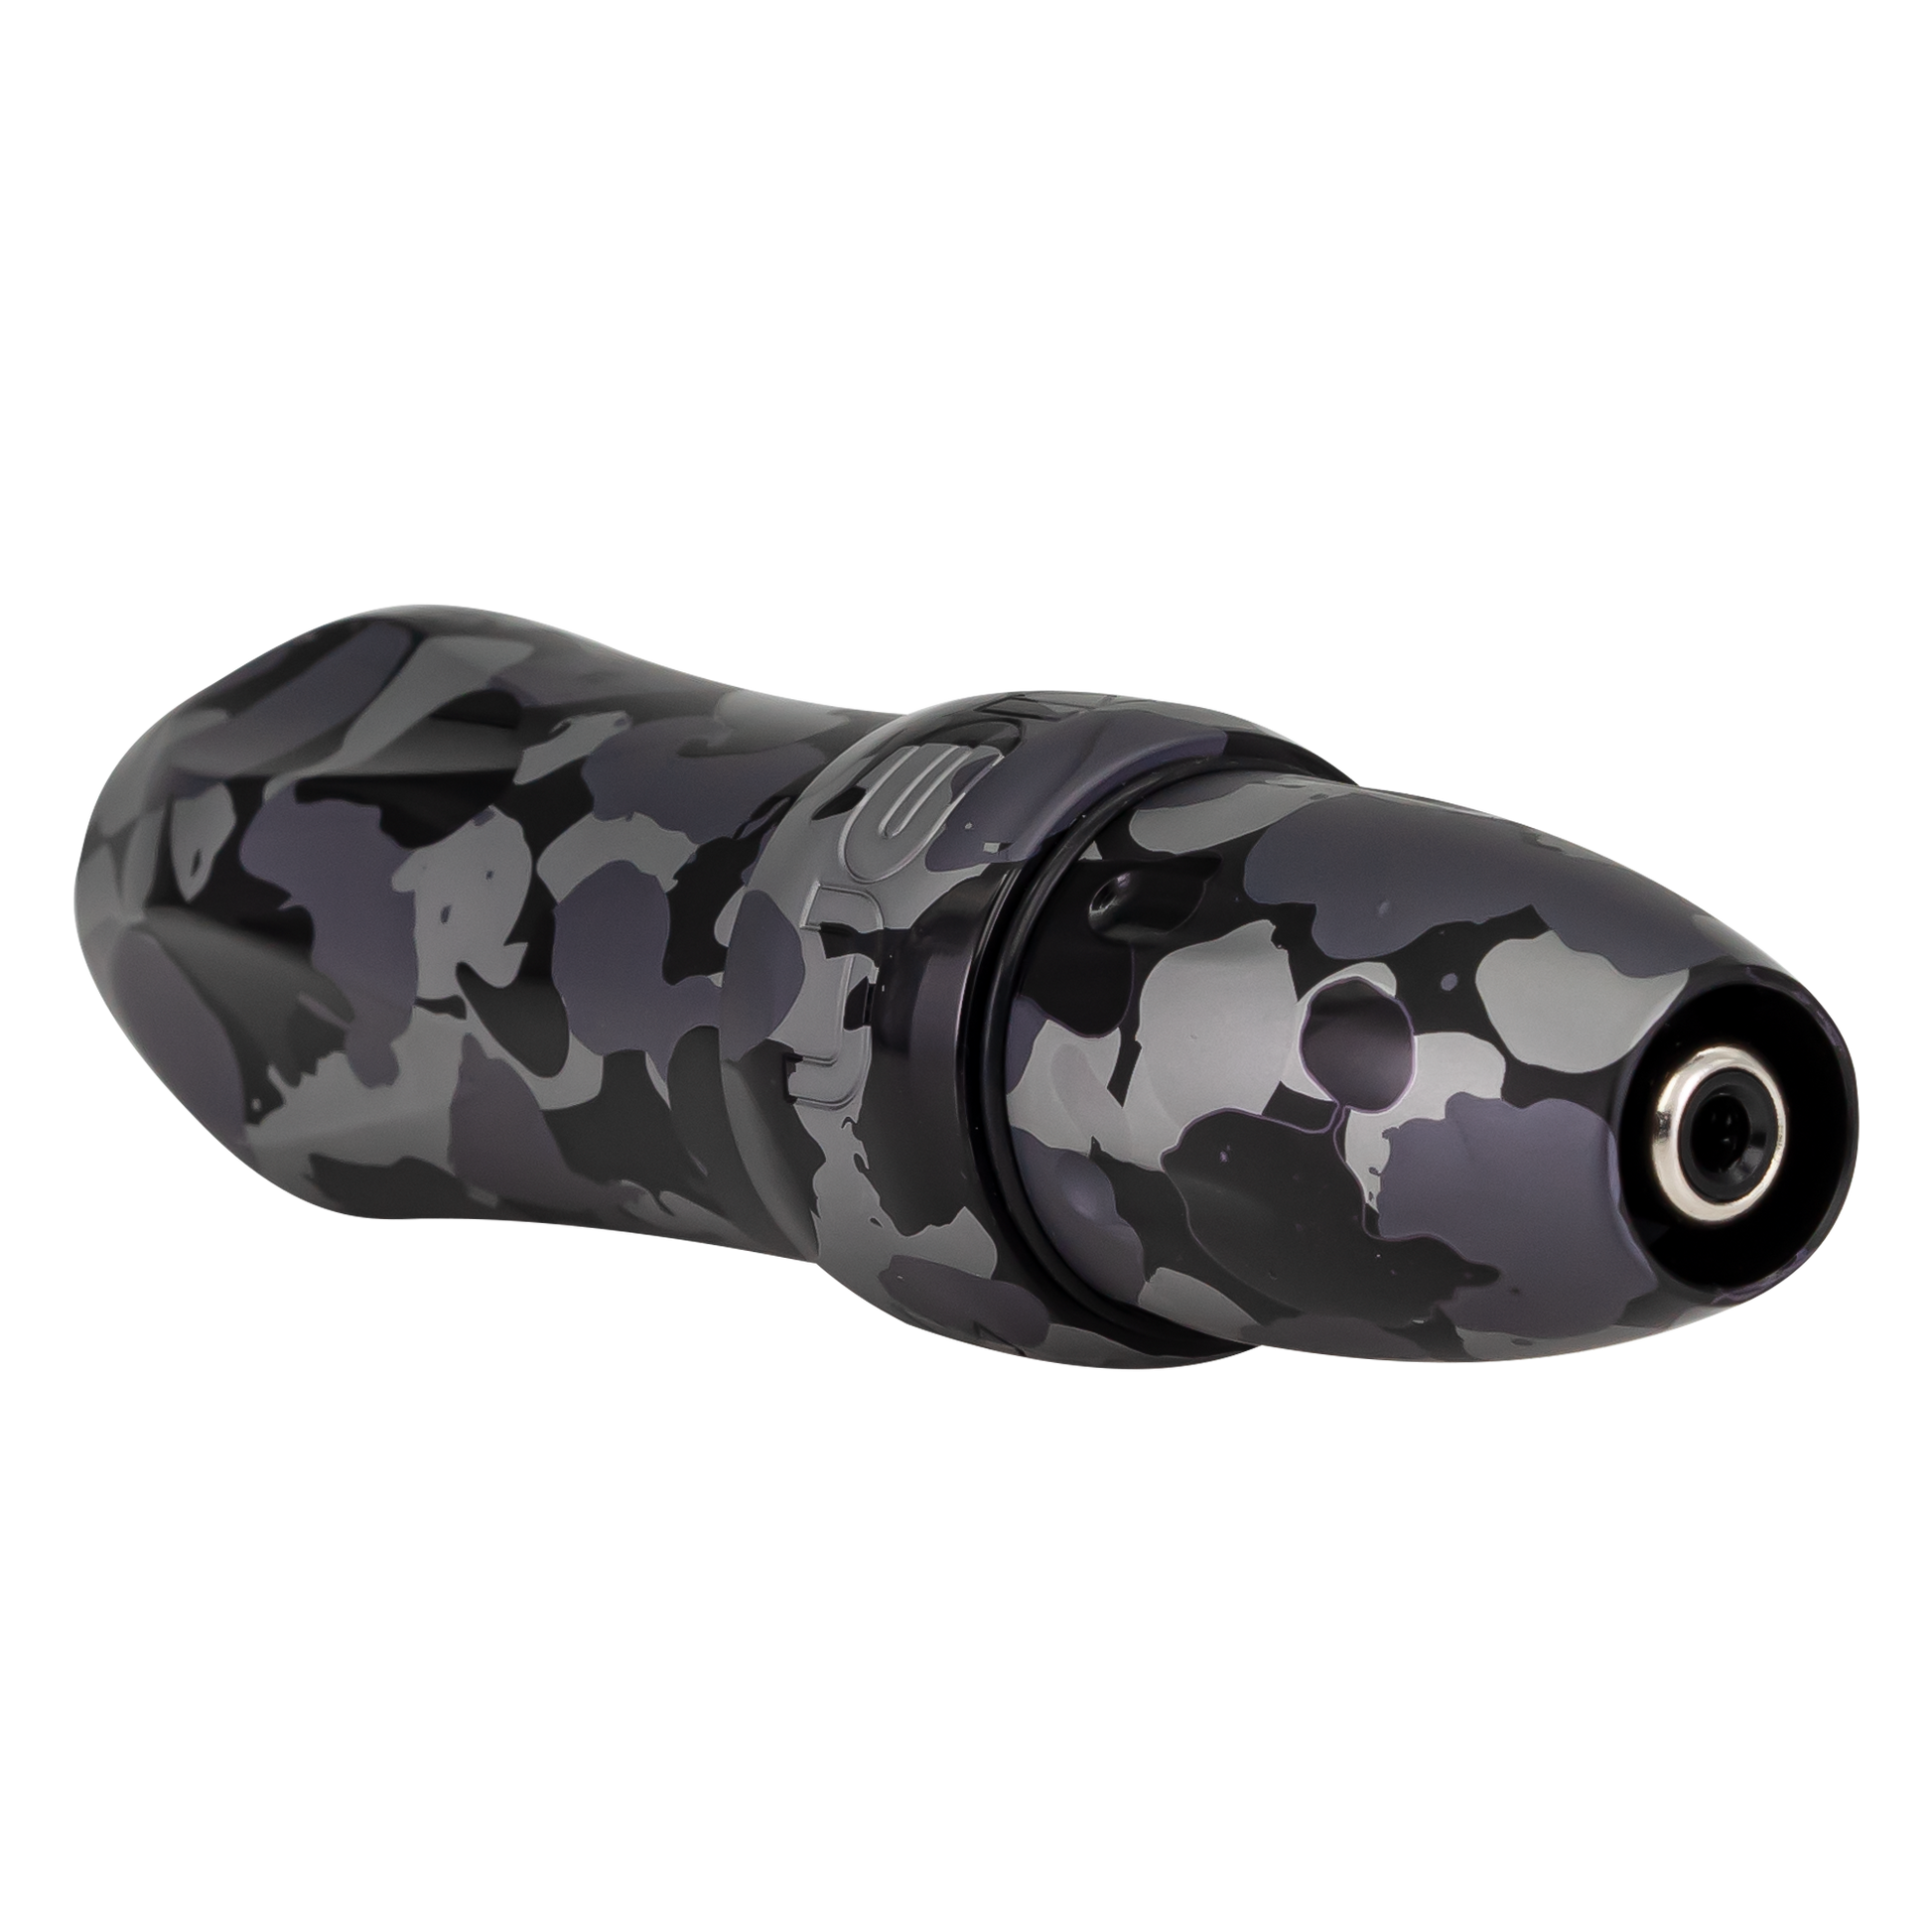 Spektra Xion in spotted black and gray camouflage, view from the plugSpektra Xion Urban Camo with LightningBolt